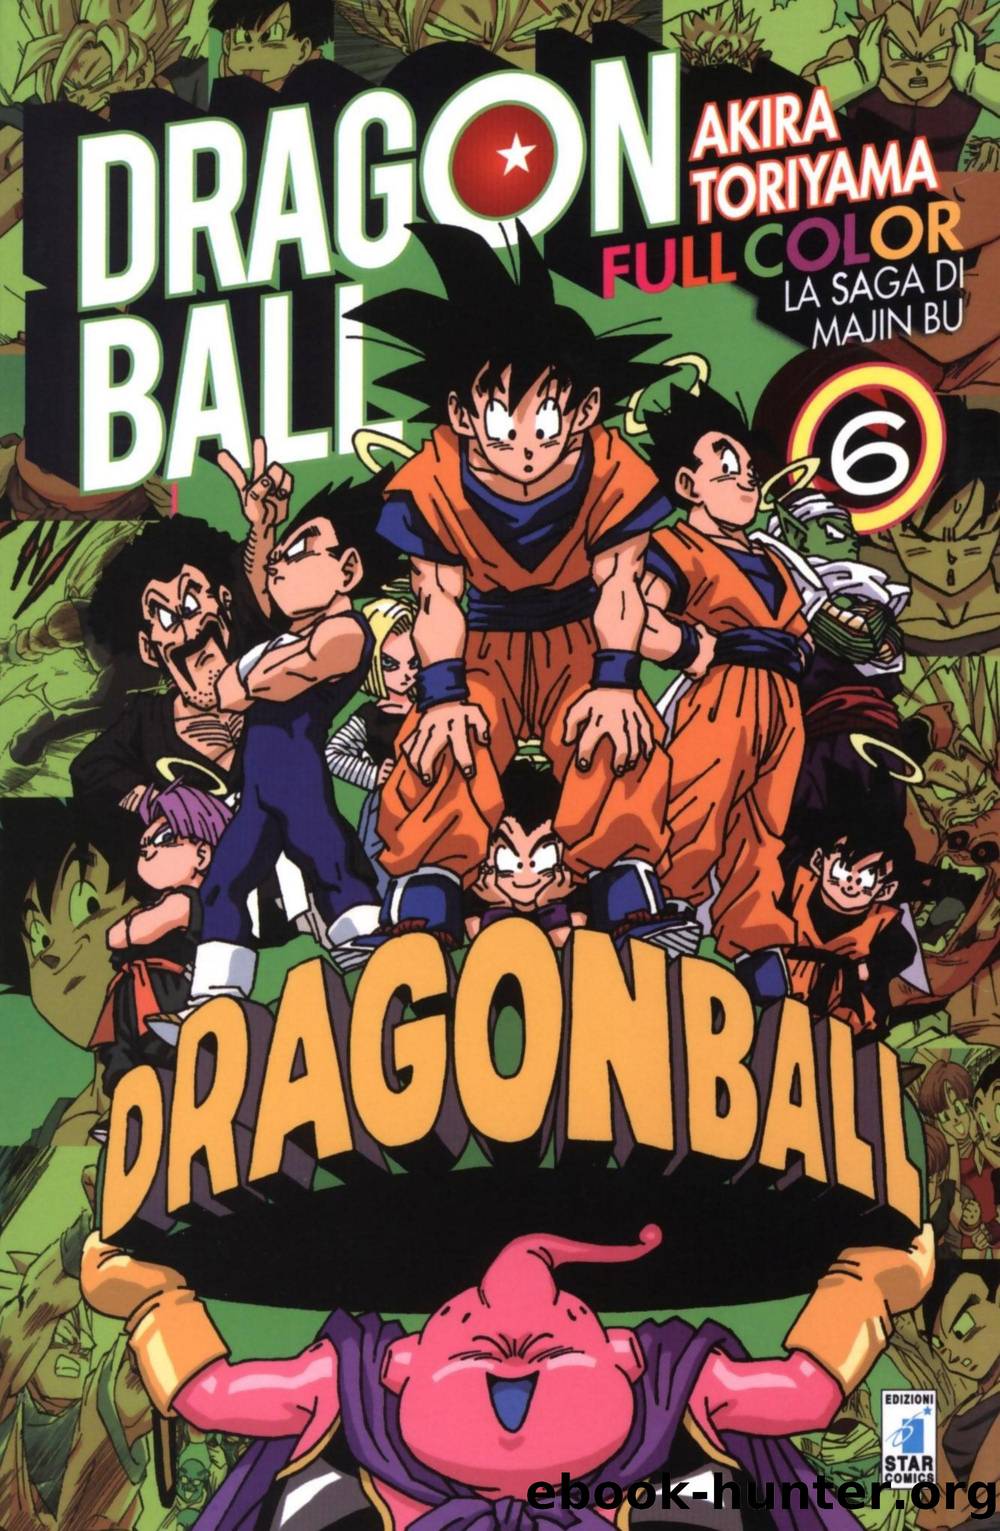 Dragon Ball Full Color [Volume 32] by Unknown